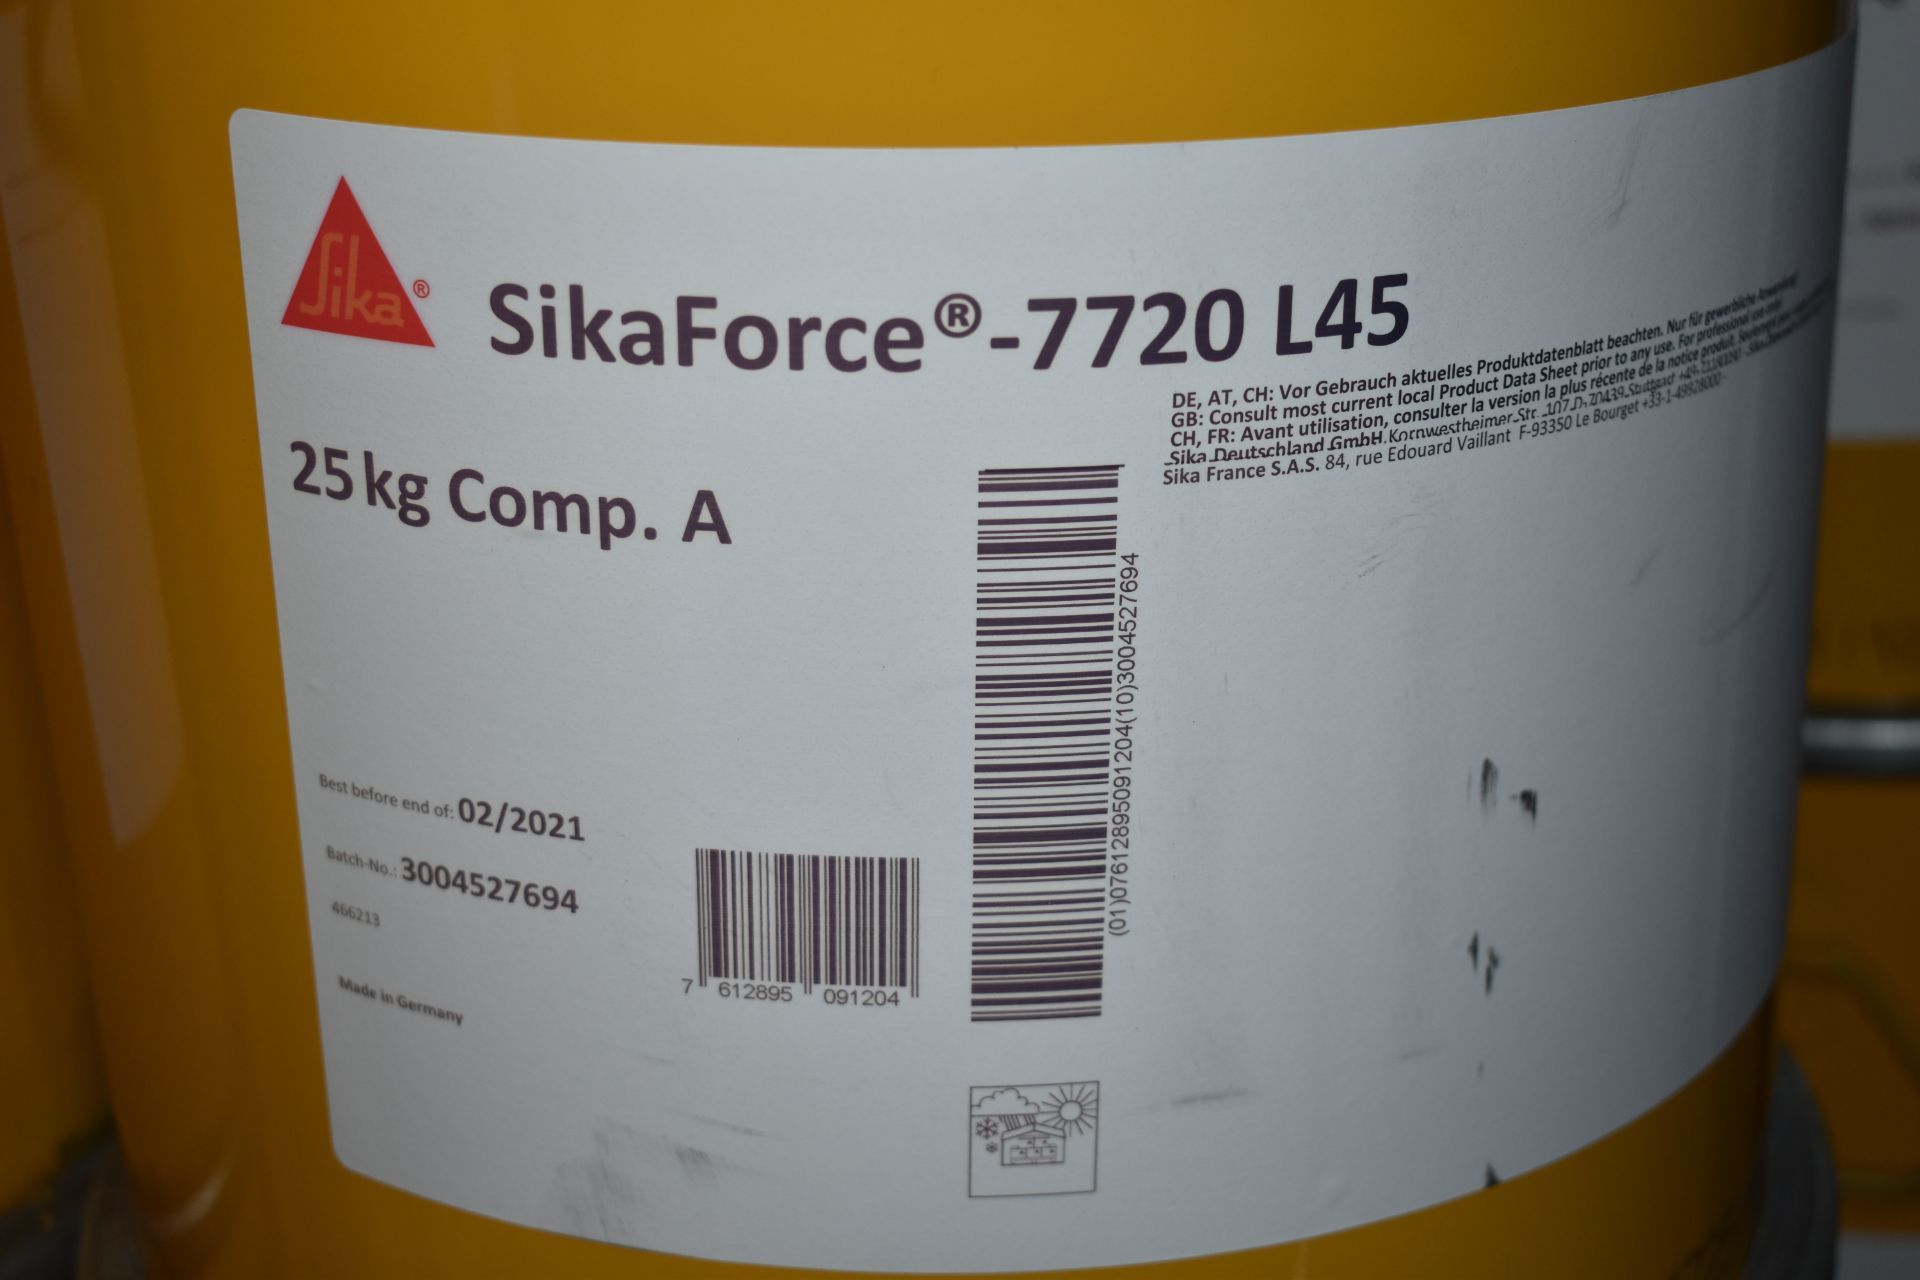 SikaForce -7720 L45 None Sagging Assembly Adhesive 25kg Barrel - New Sealed Stock - New - CL622 - Re - Image 2 of 3